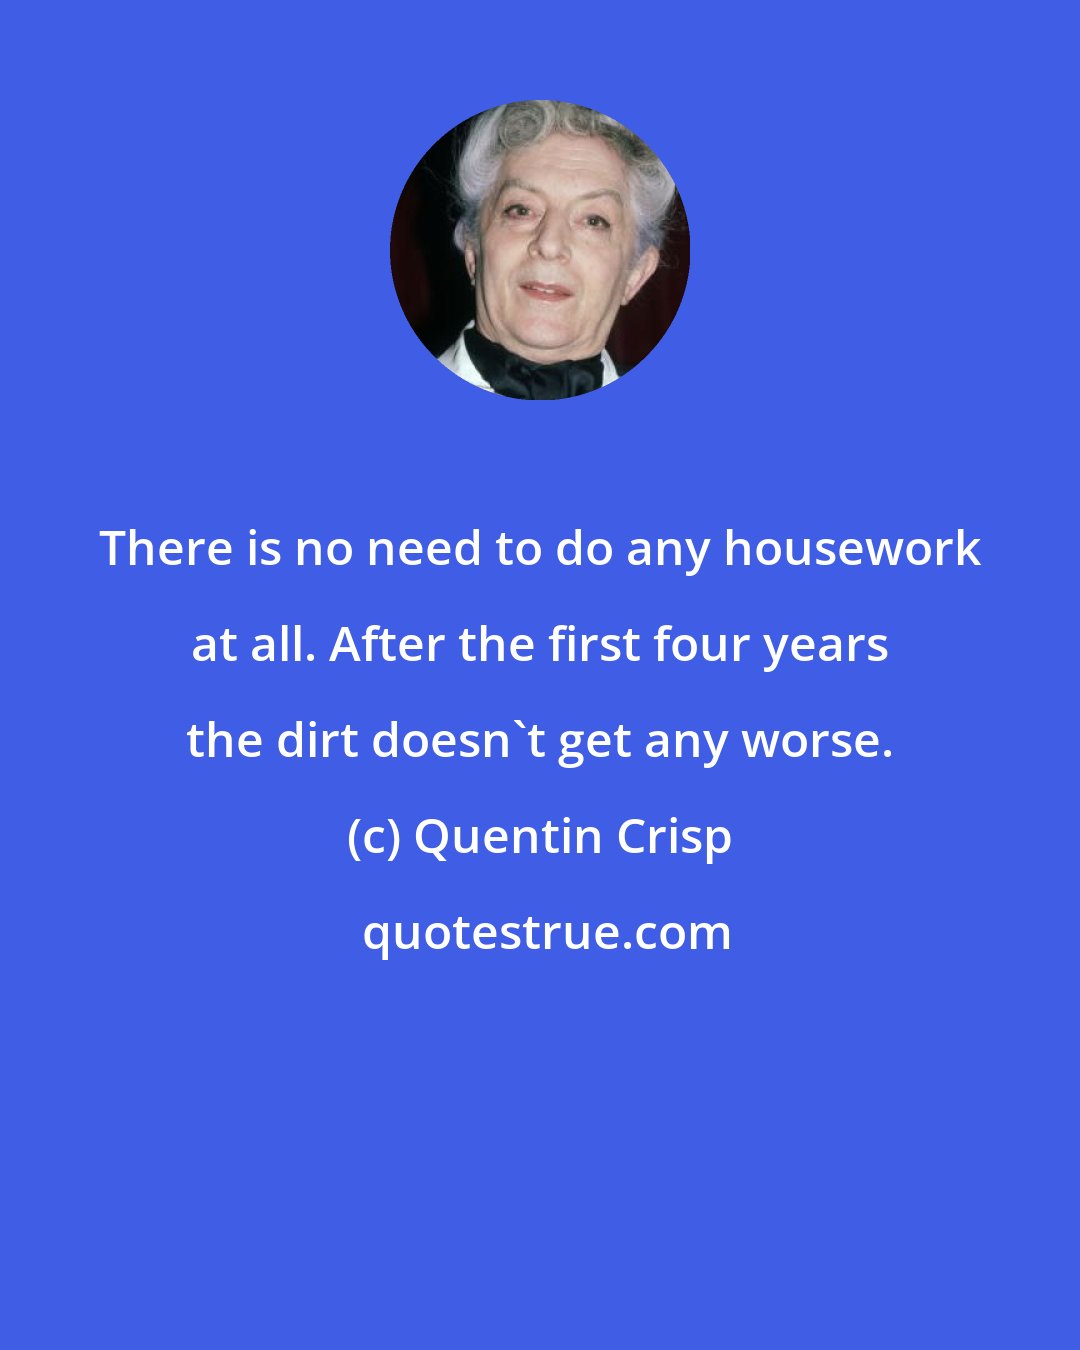 Quentin Crisp: There is no need to do any housework at all. After the first four years the dirt doesn't get any worse.